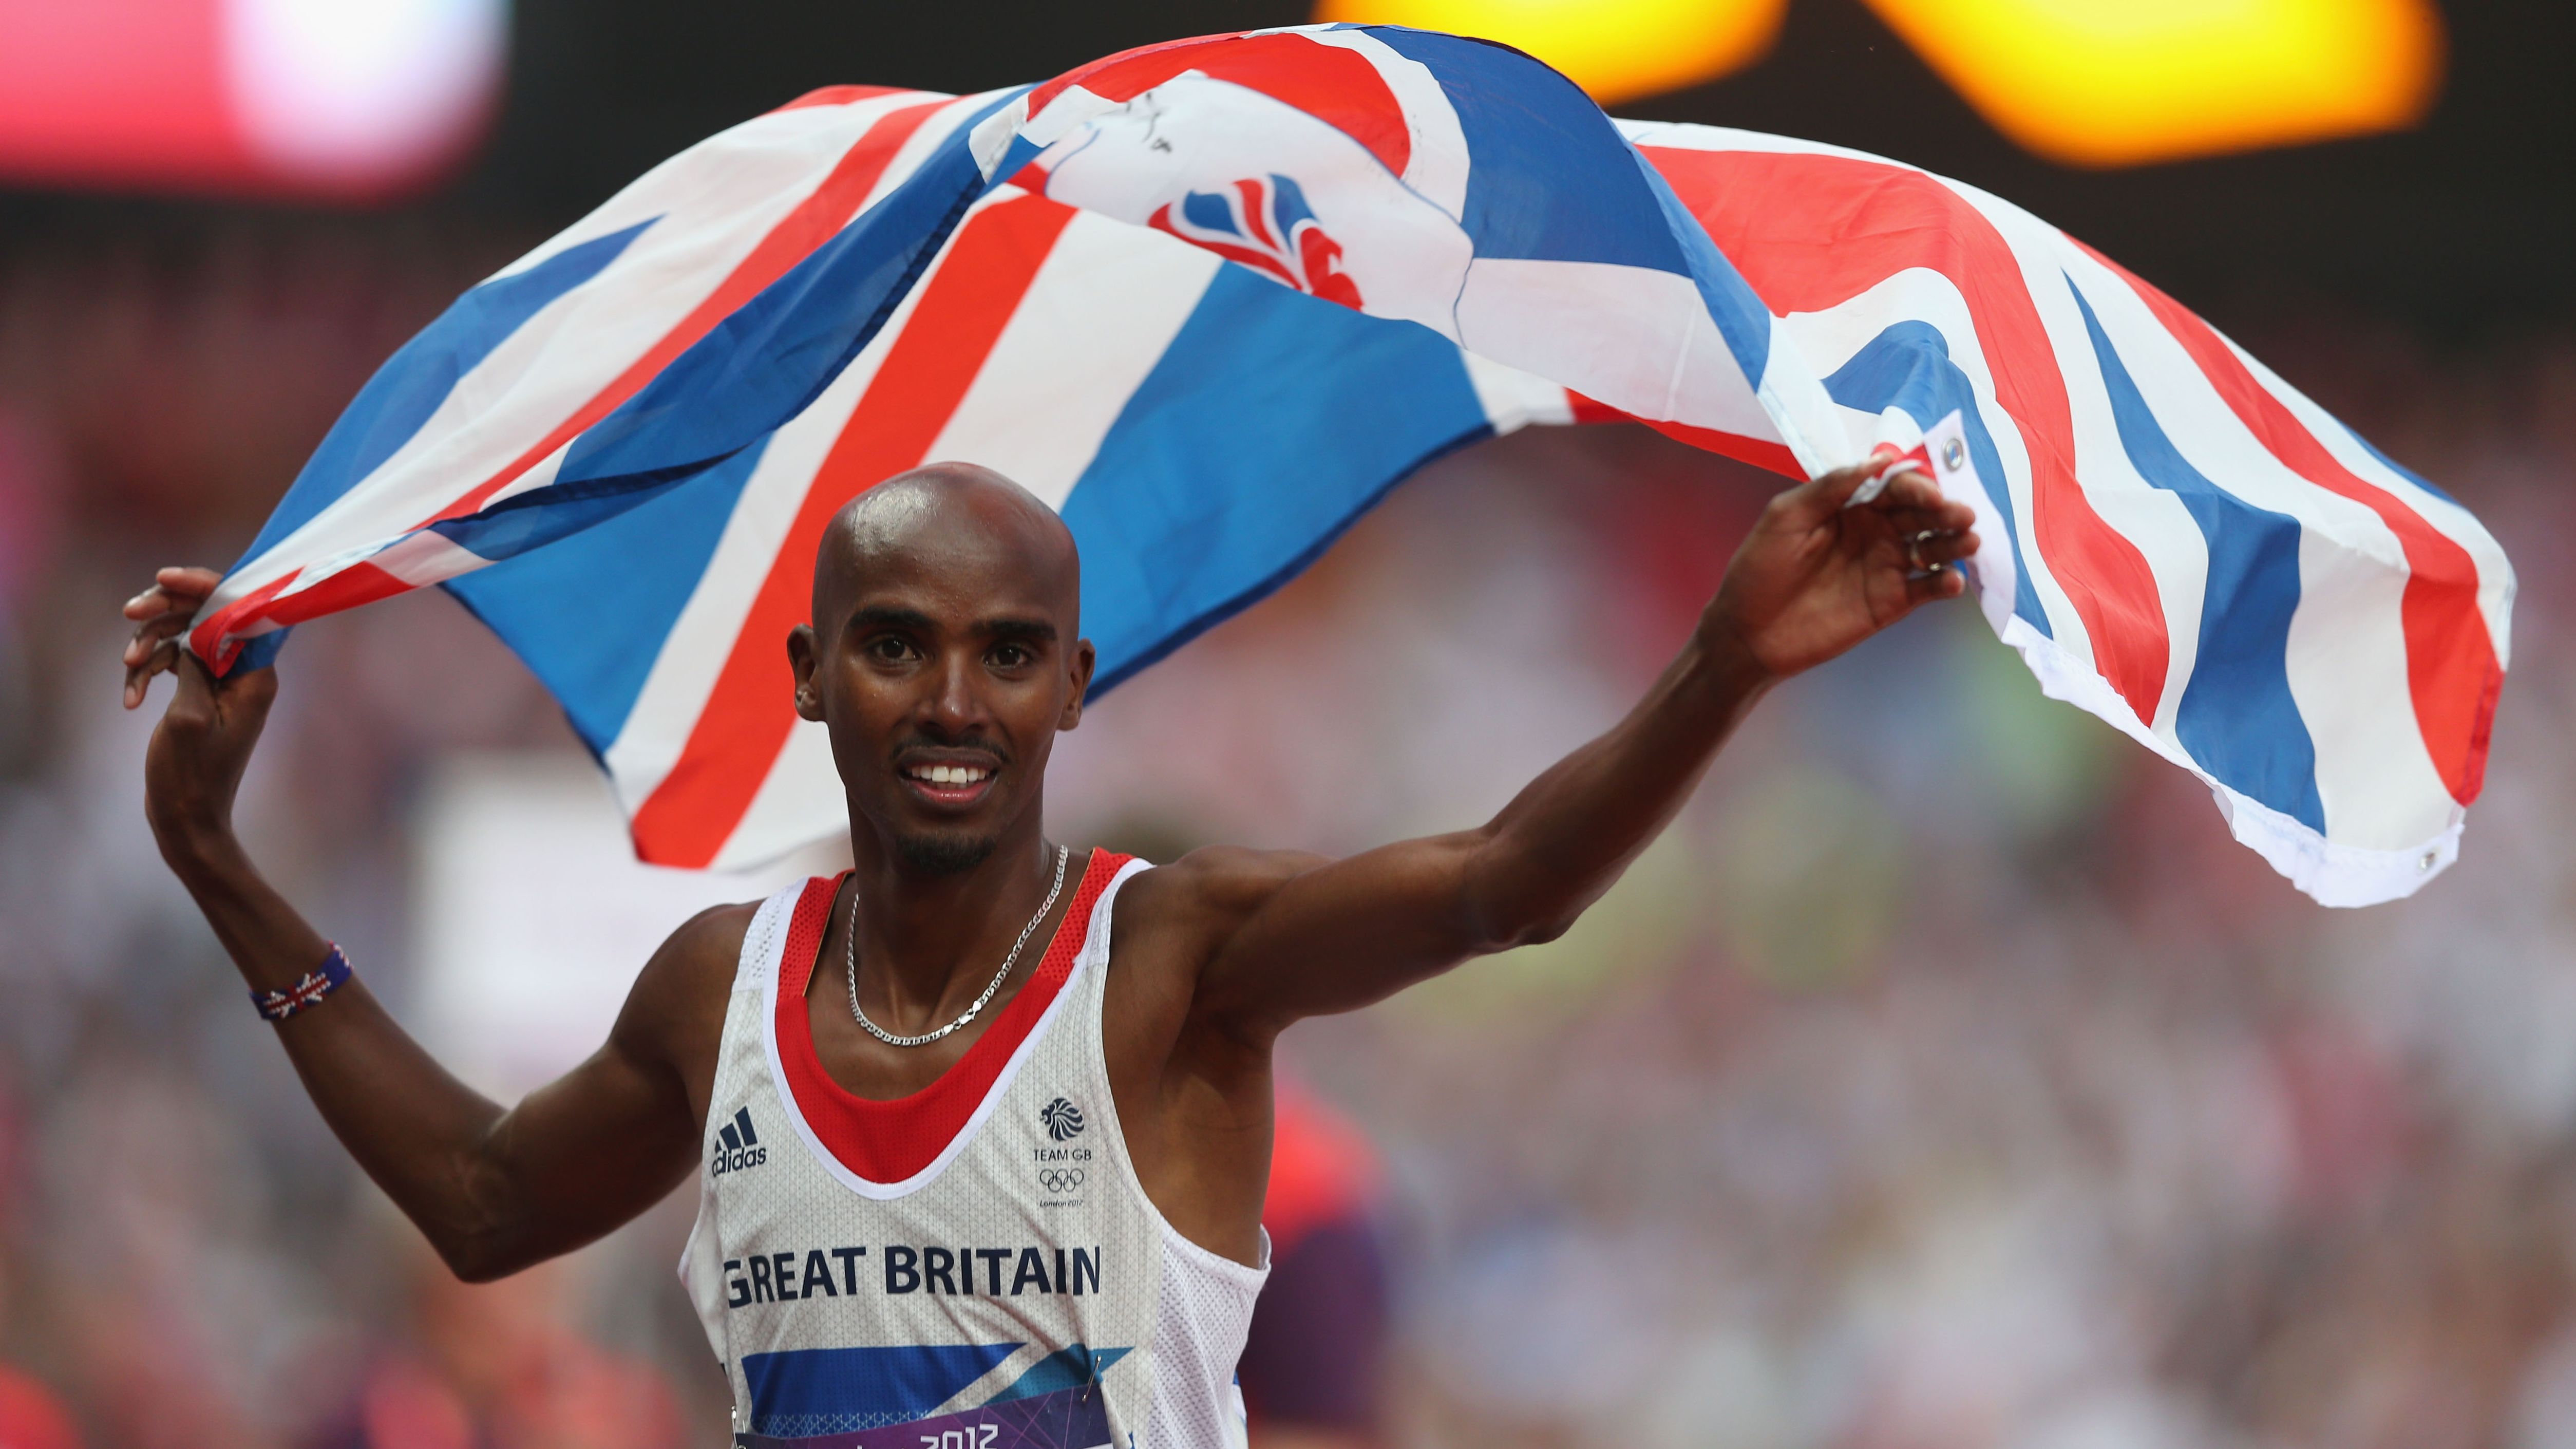 "This is my country and when I put on my Great Britain vest I'm proud," Mo Farah said after winning the 5000m.